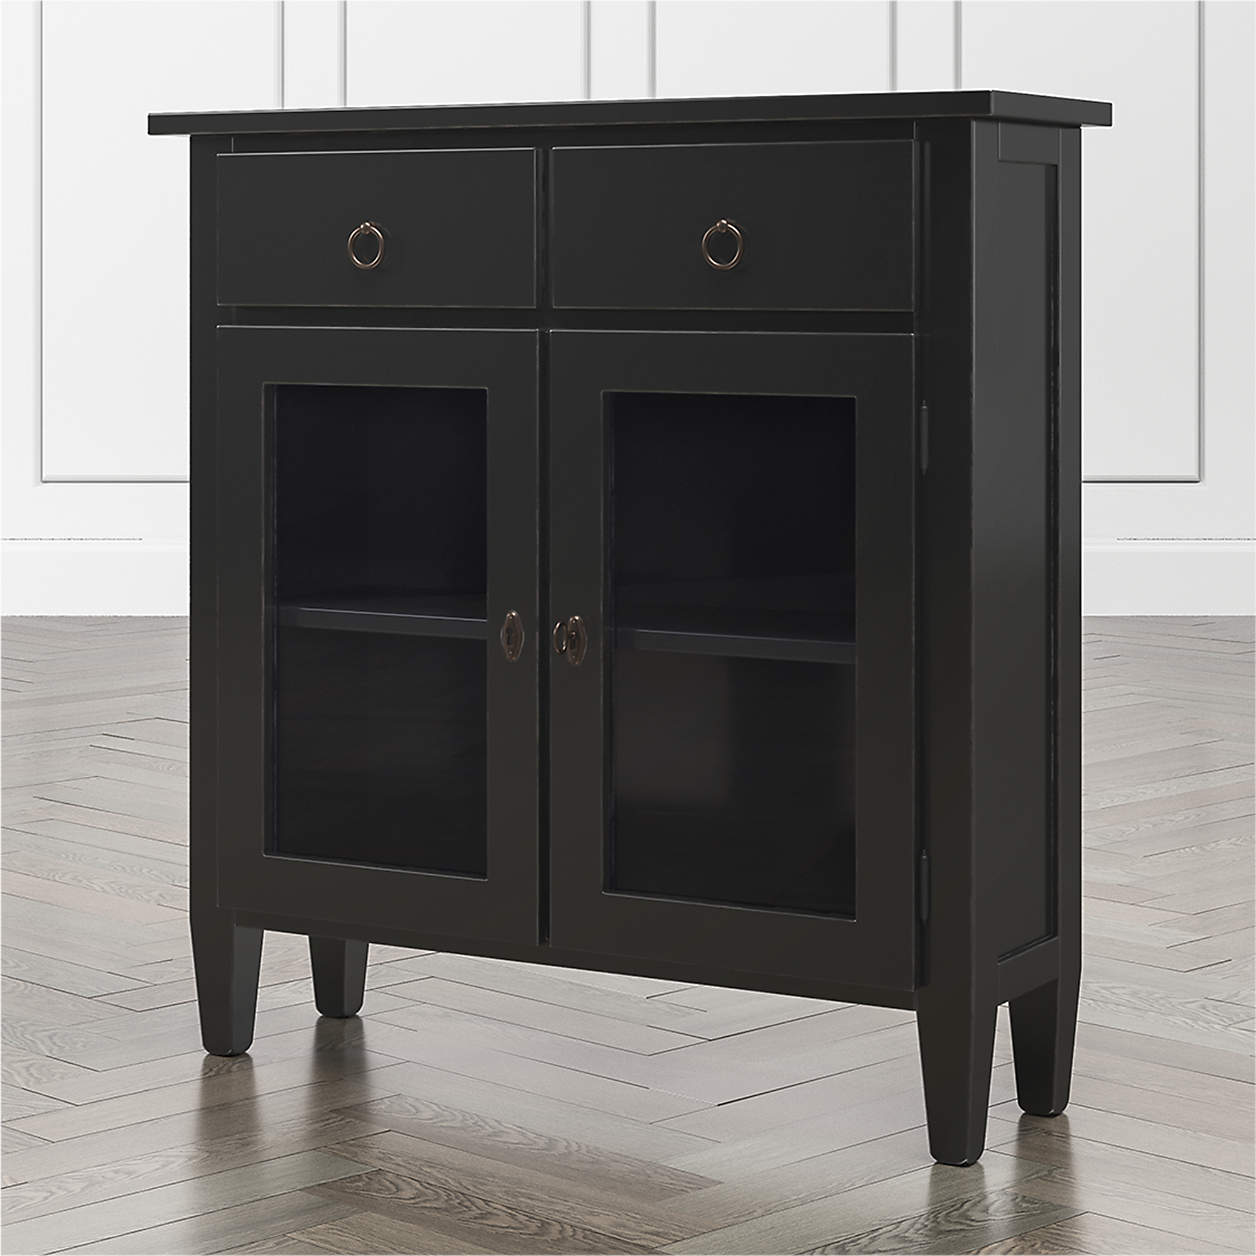 Stretto Bruno Black Entryway Cabinet + Reviews | Crate and Barrel